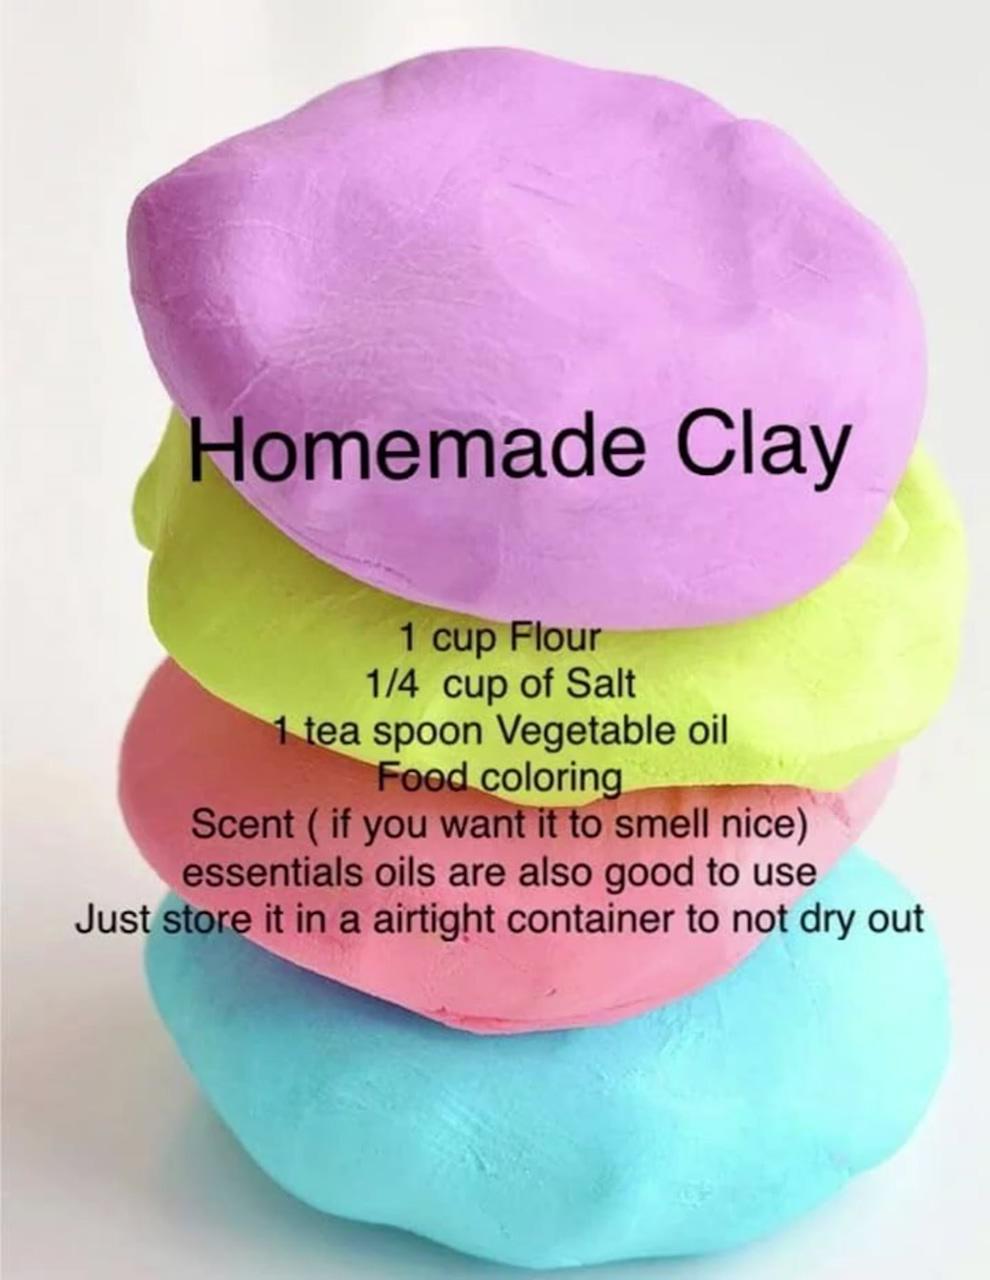 How to make homemade clay | fun crafts to do